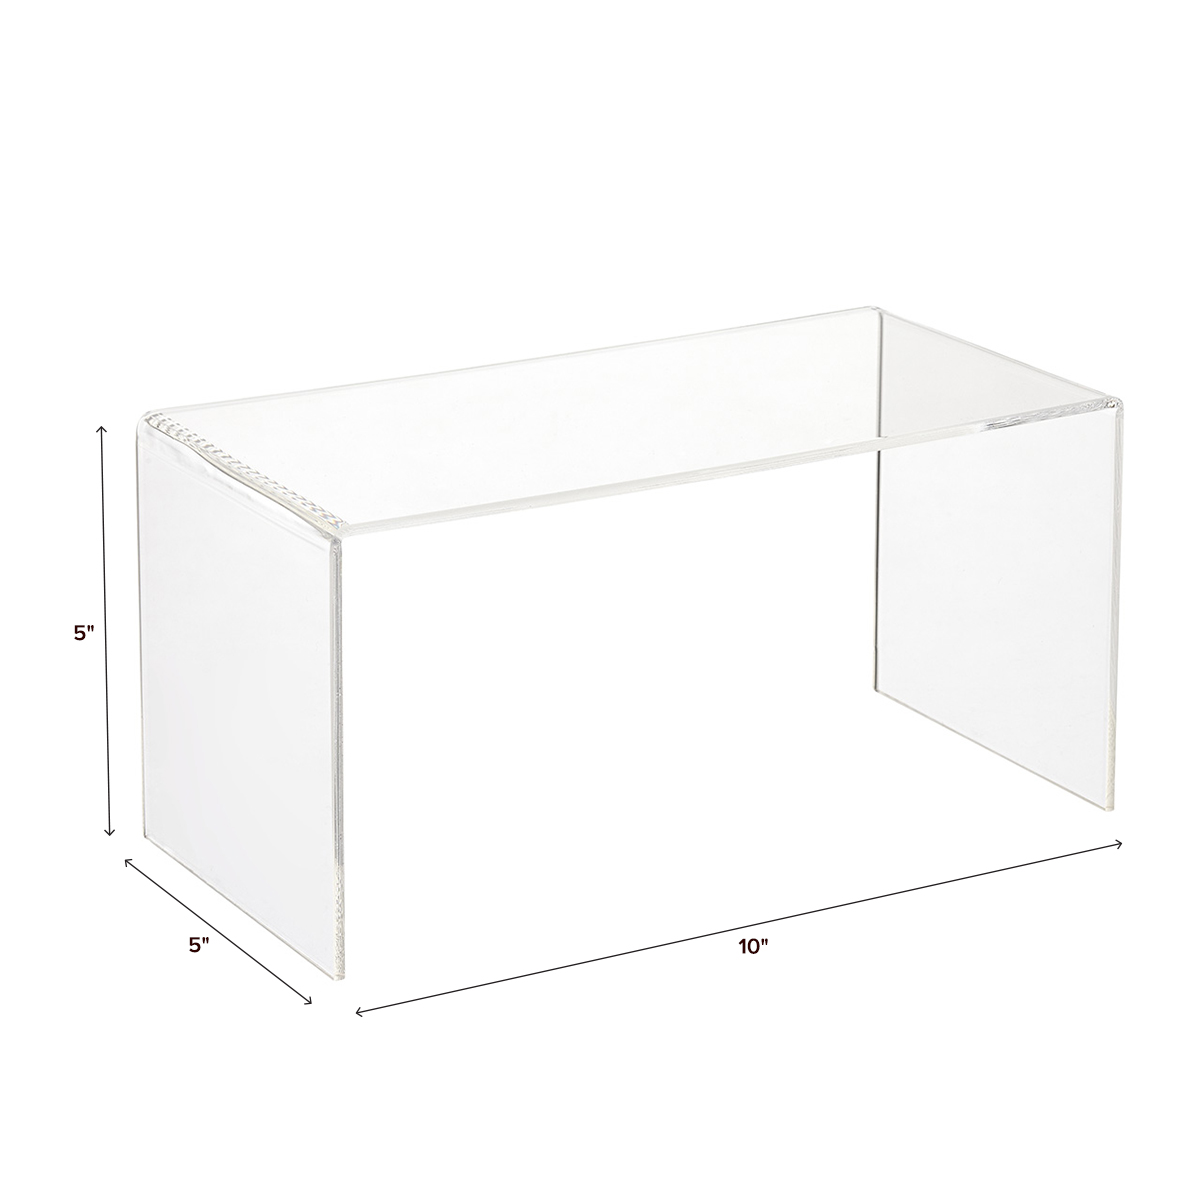 6x Clear Acrylic Riser Stand counter jewelry display 4"L x 1-3/16"H x 3-1/2"D 